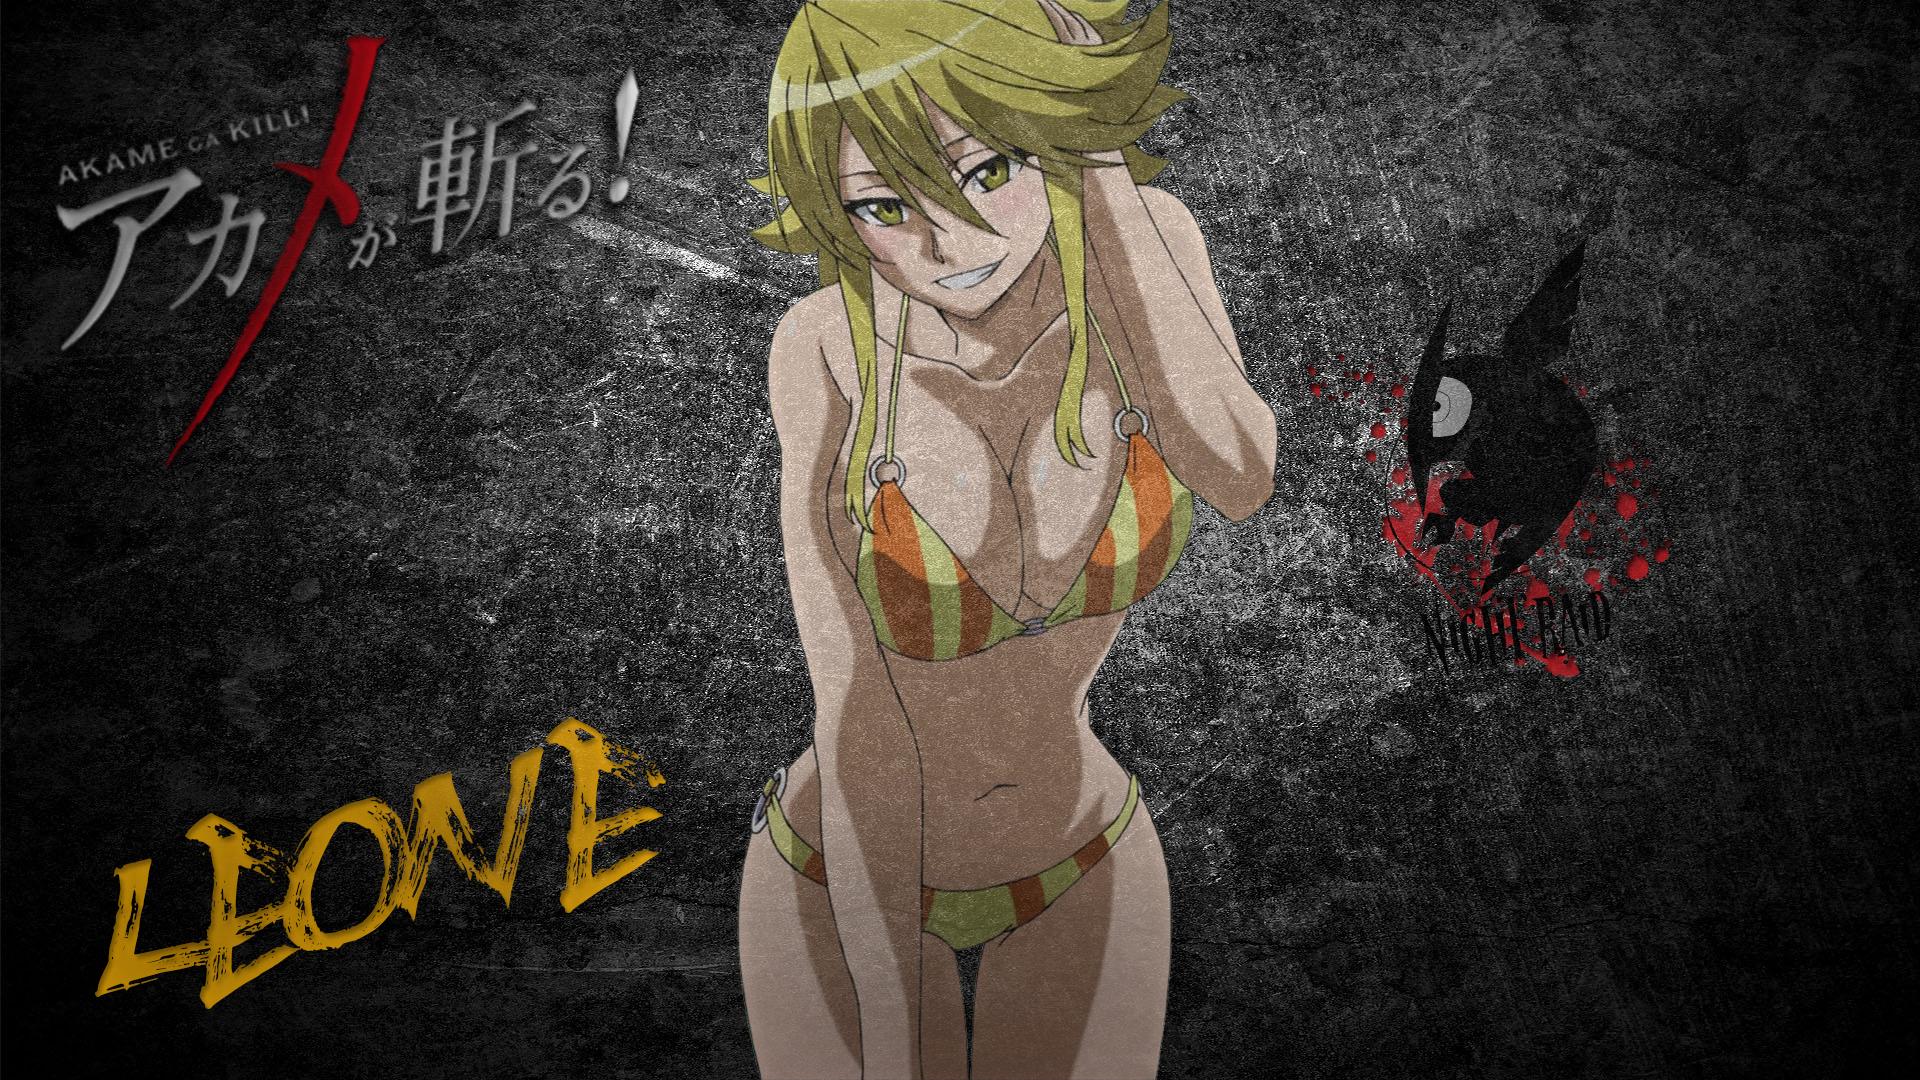 Download Leone Akame Wallpaper Hd Backgrounds Download Itl Cat